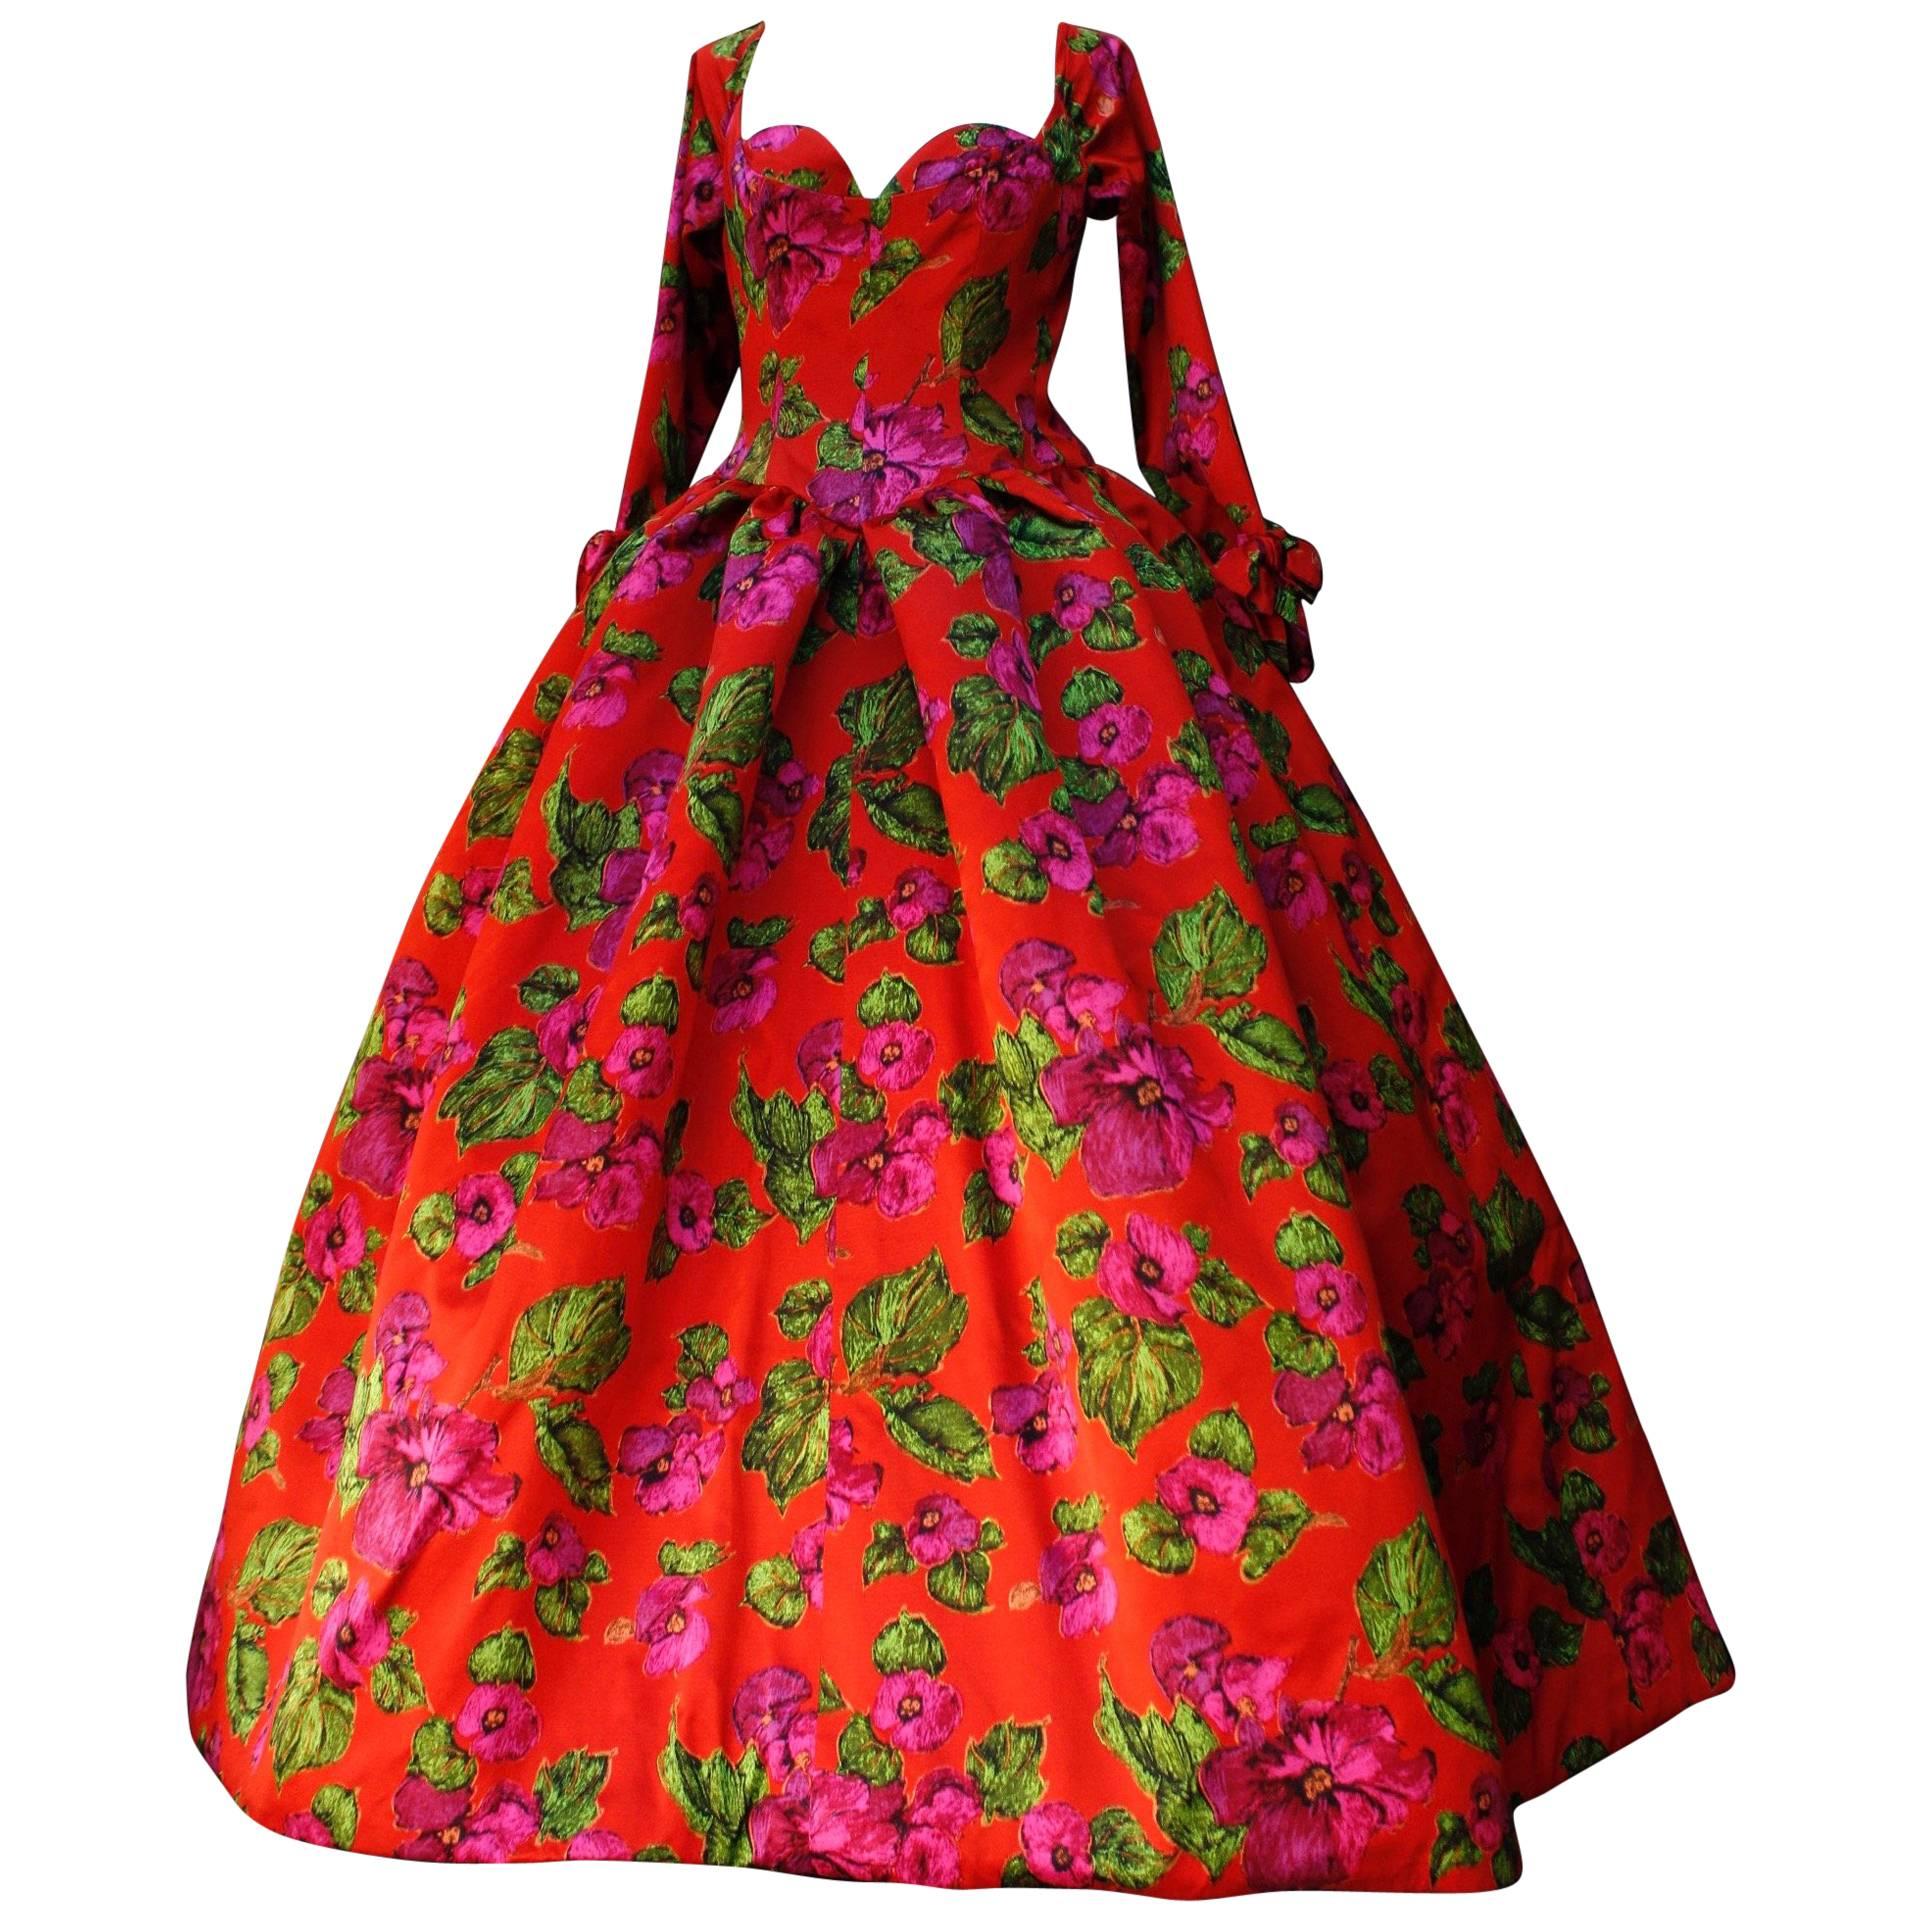 Nina Ricci red opera dress with pink and green floral print, 1990s 